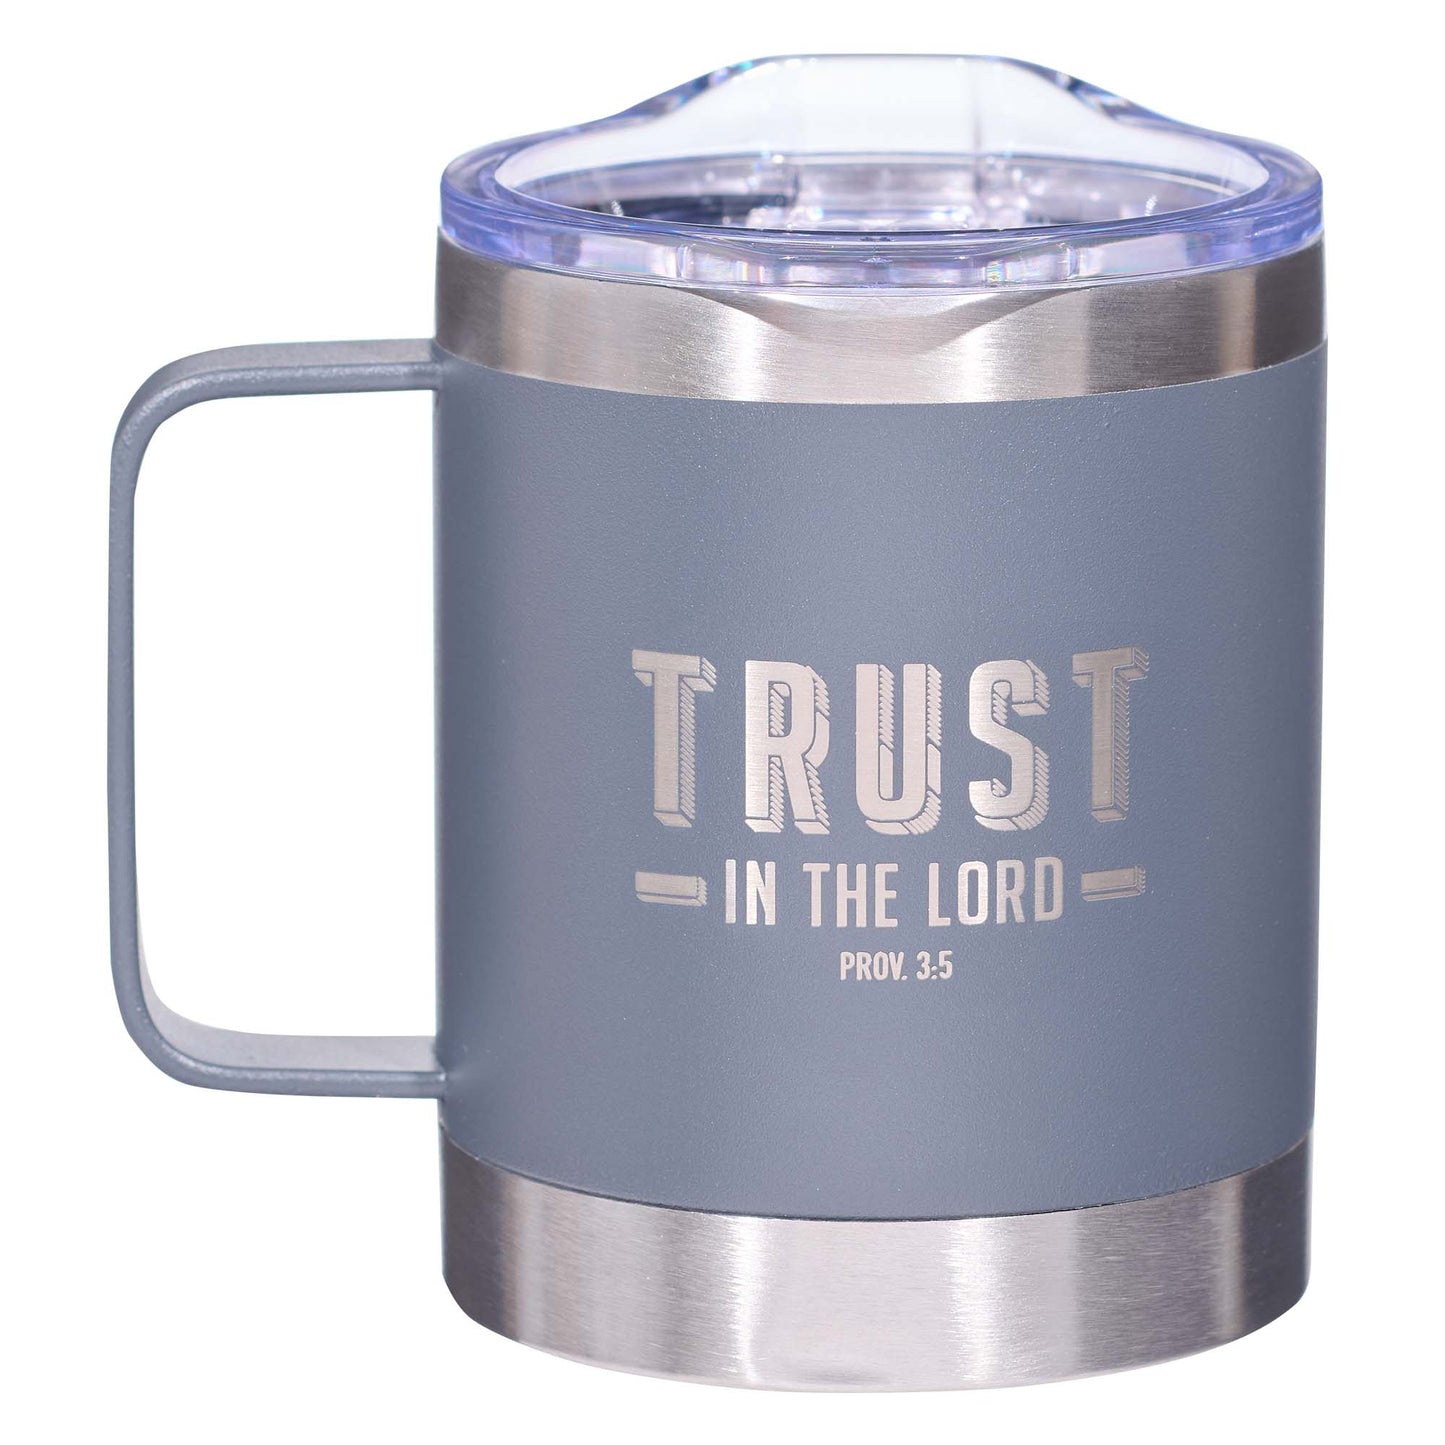 Trust the LORD Cool Grey Camp-style Stainless Steel Mug - Proverbs 3:5 - The Christian Gift Company